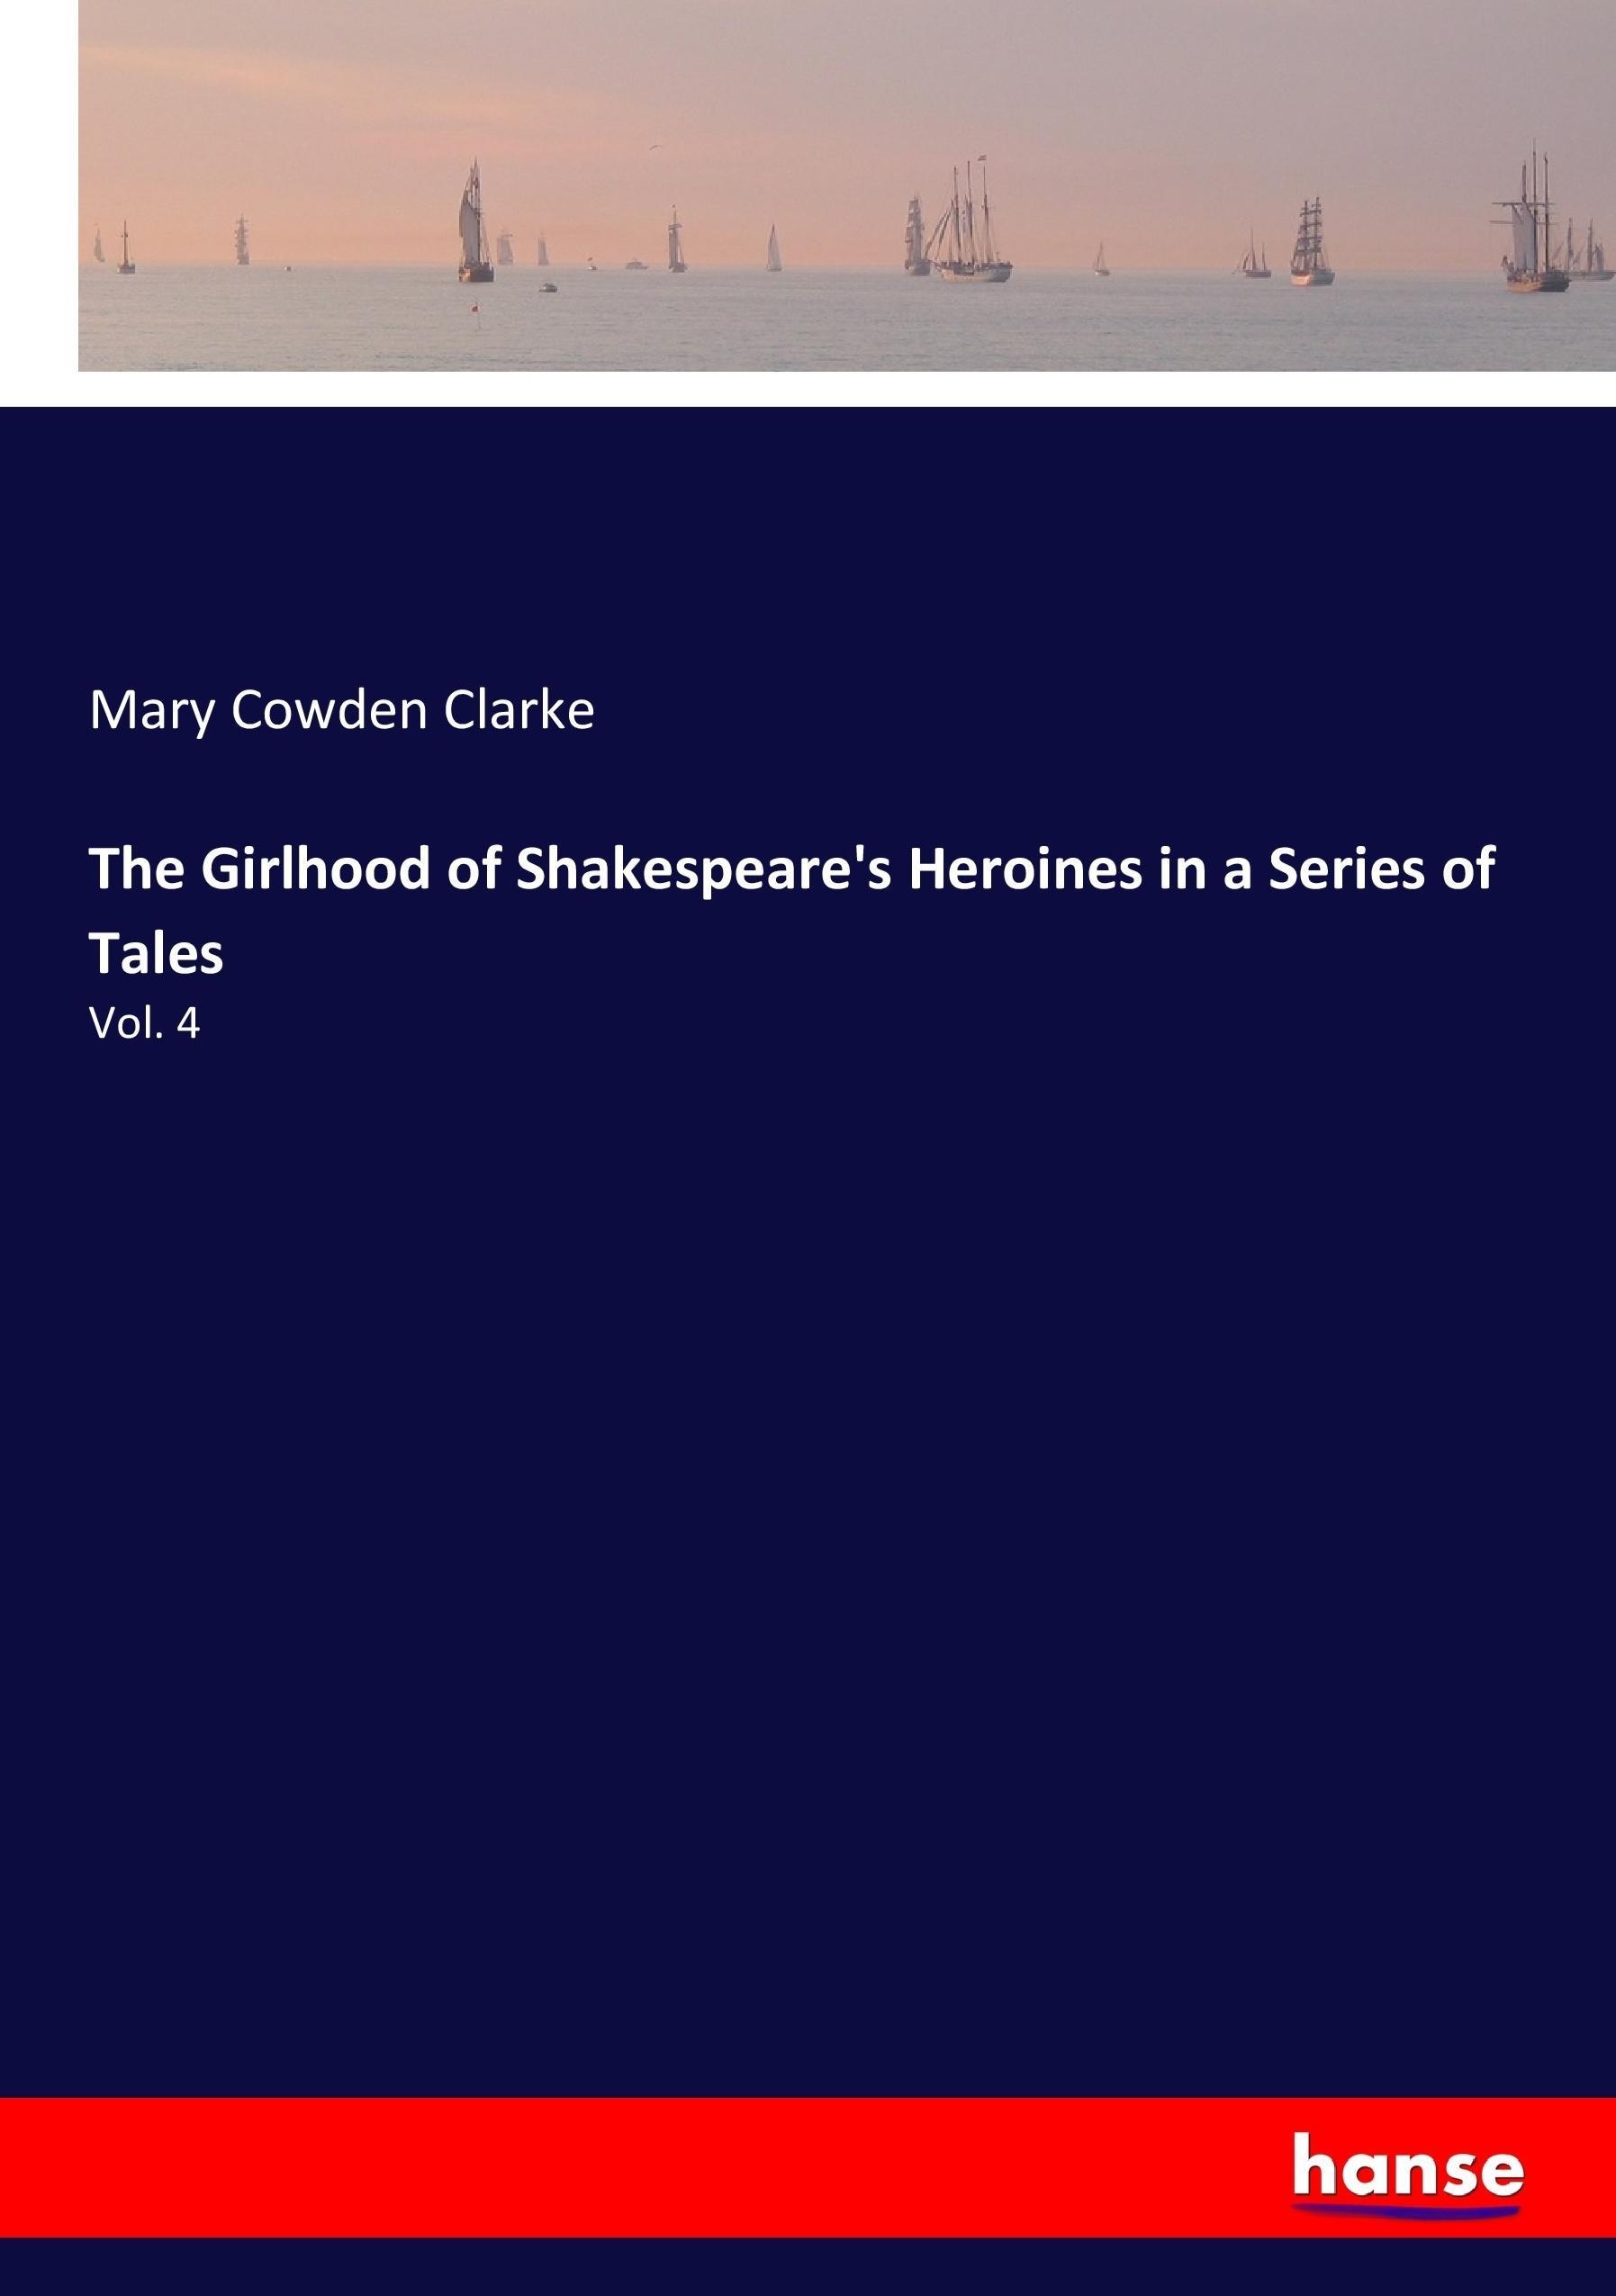 The Girlhood of Shakespeare's Heroines in a Series of Tales | Vol. 4 | Mary Cowden Clarke | Taschenbuch | Paperback | 376 S. | Englisch | 2017 | hansebooks | EAN 9783337023614 - Clarke, Mary Cowden